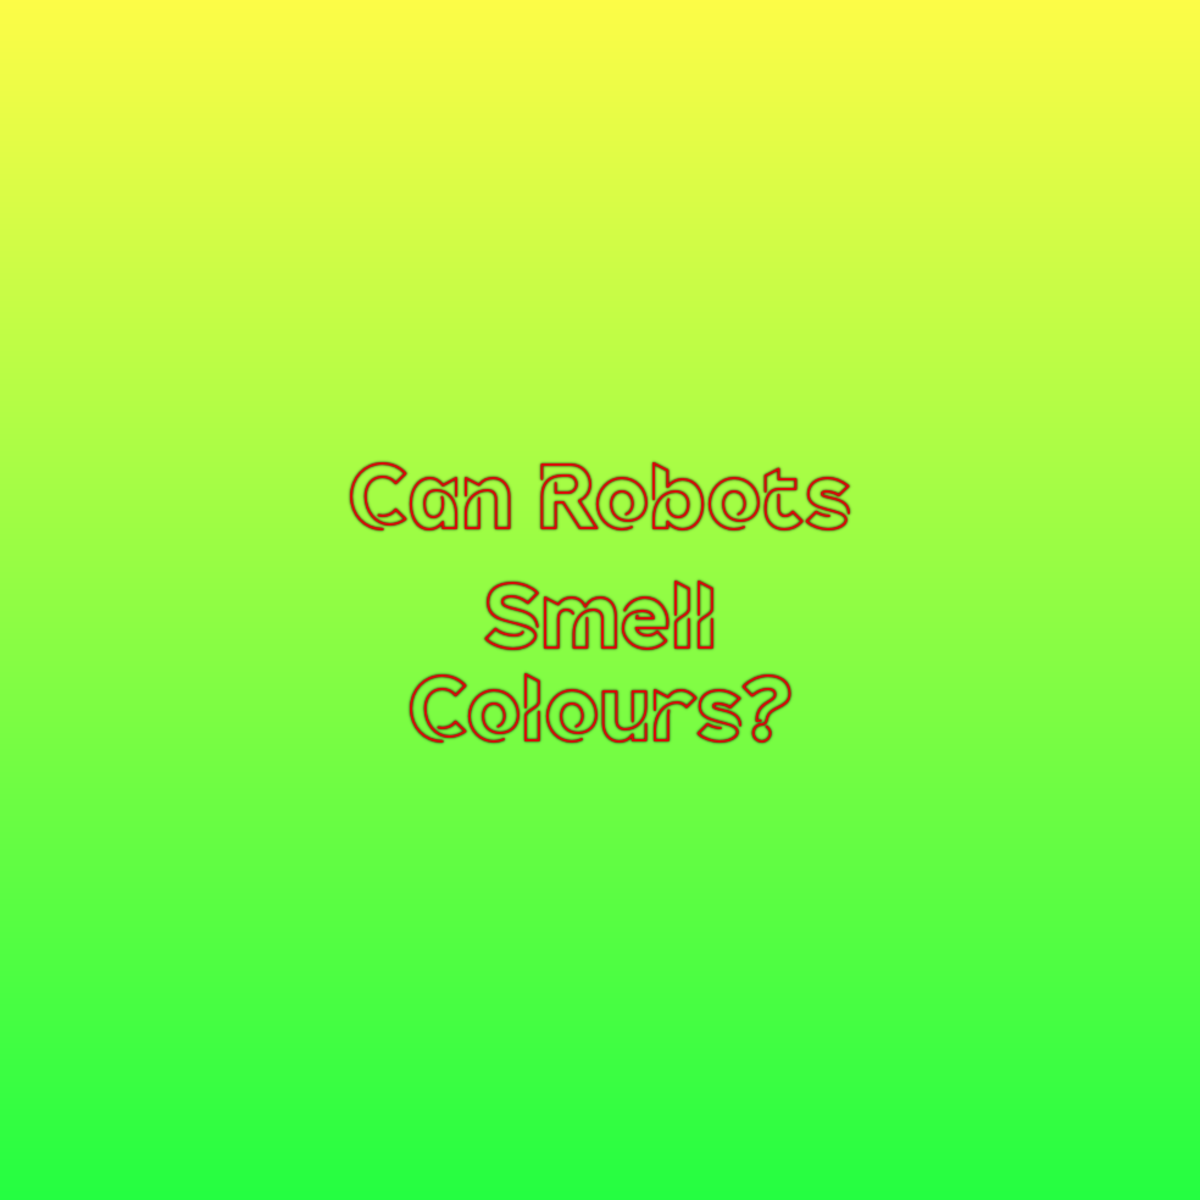 Can Robots Smell Colours?